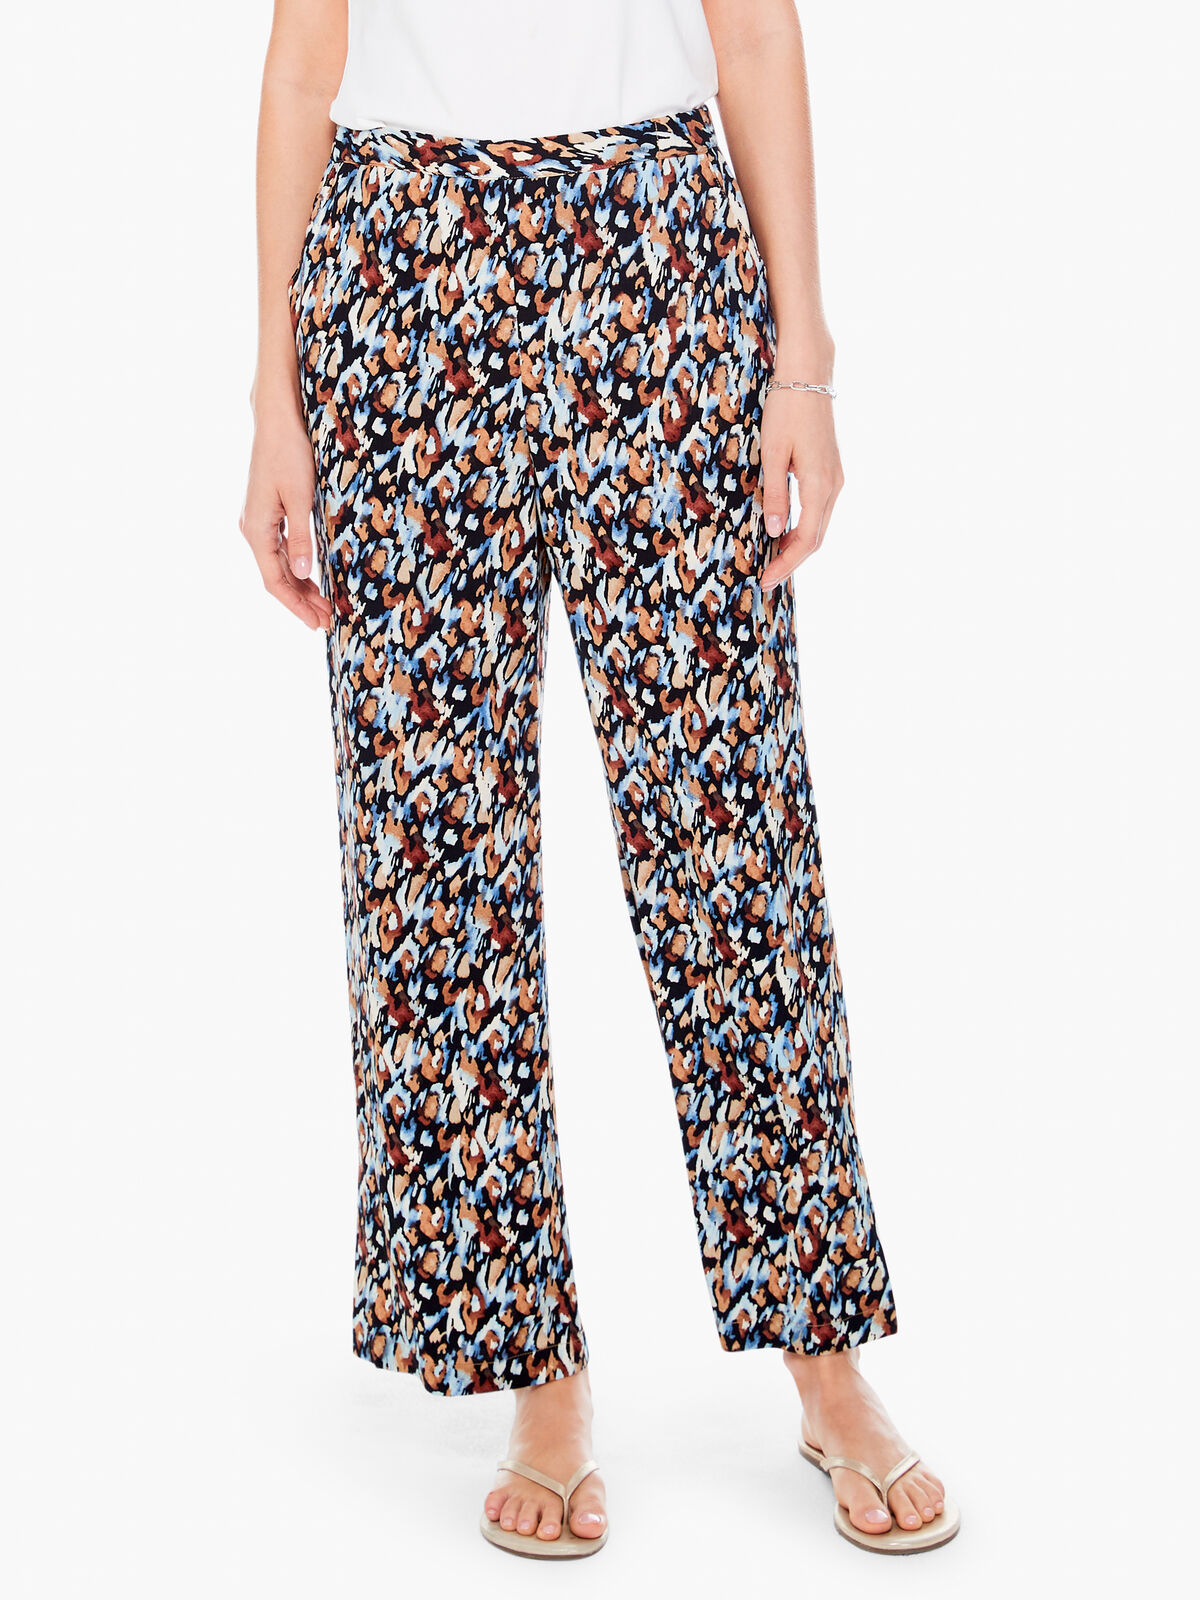 Painted Leopard Printed Pant